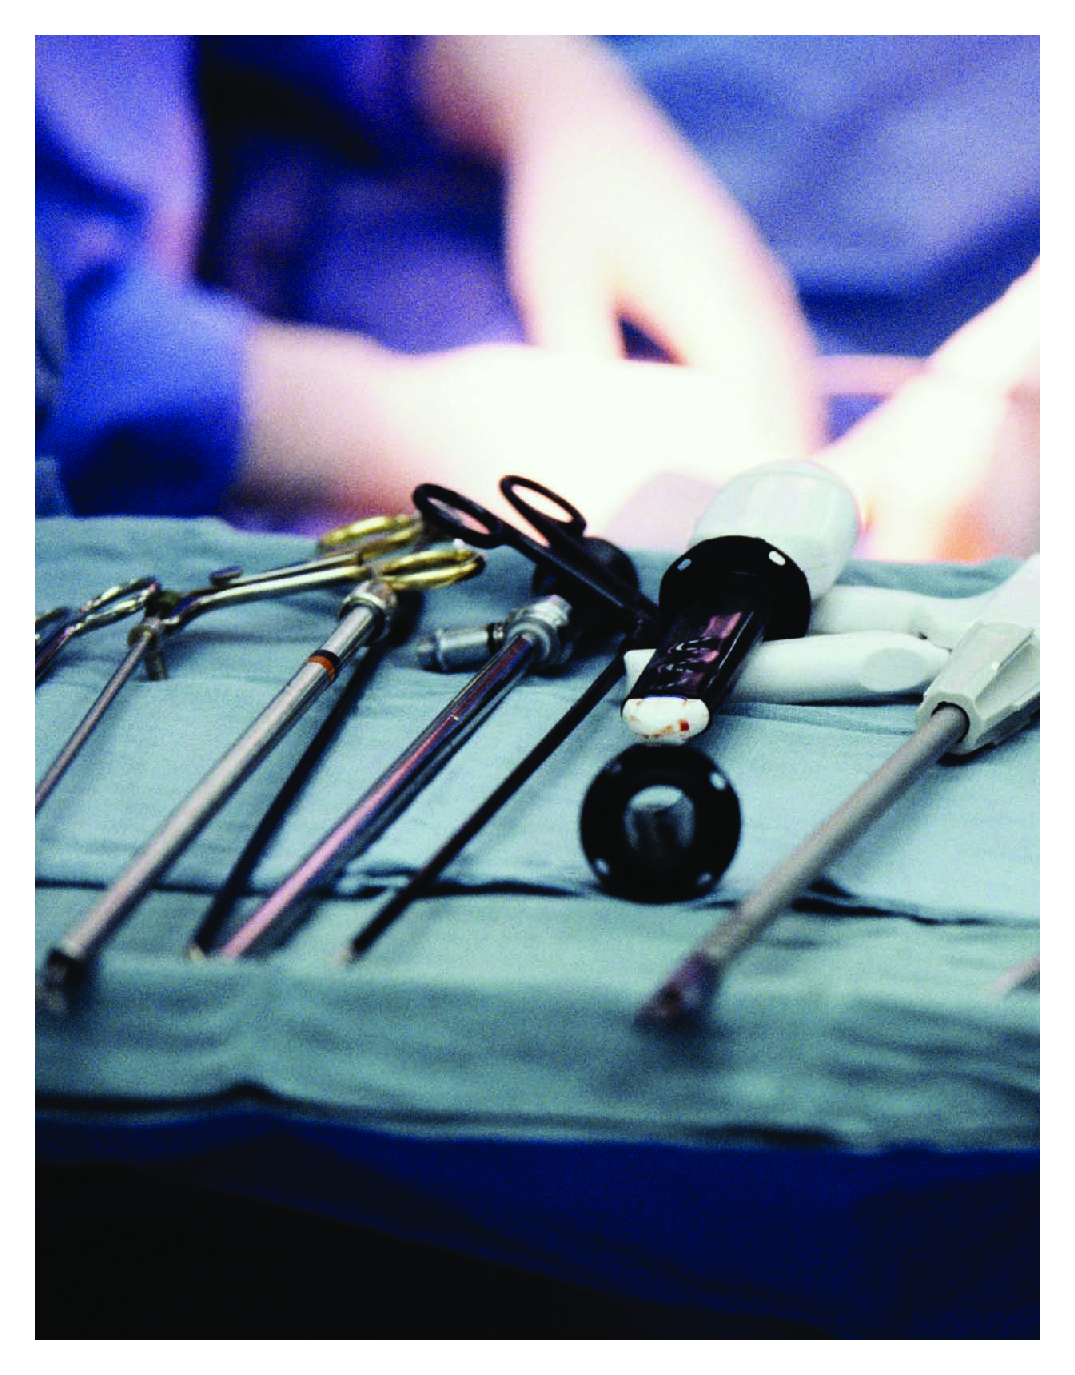 Surgical Adhesions: Implications for Women's Health: Part Two of a Two-Part Series